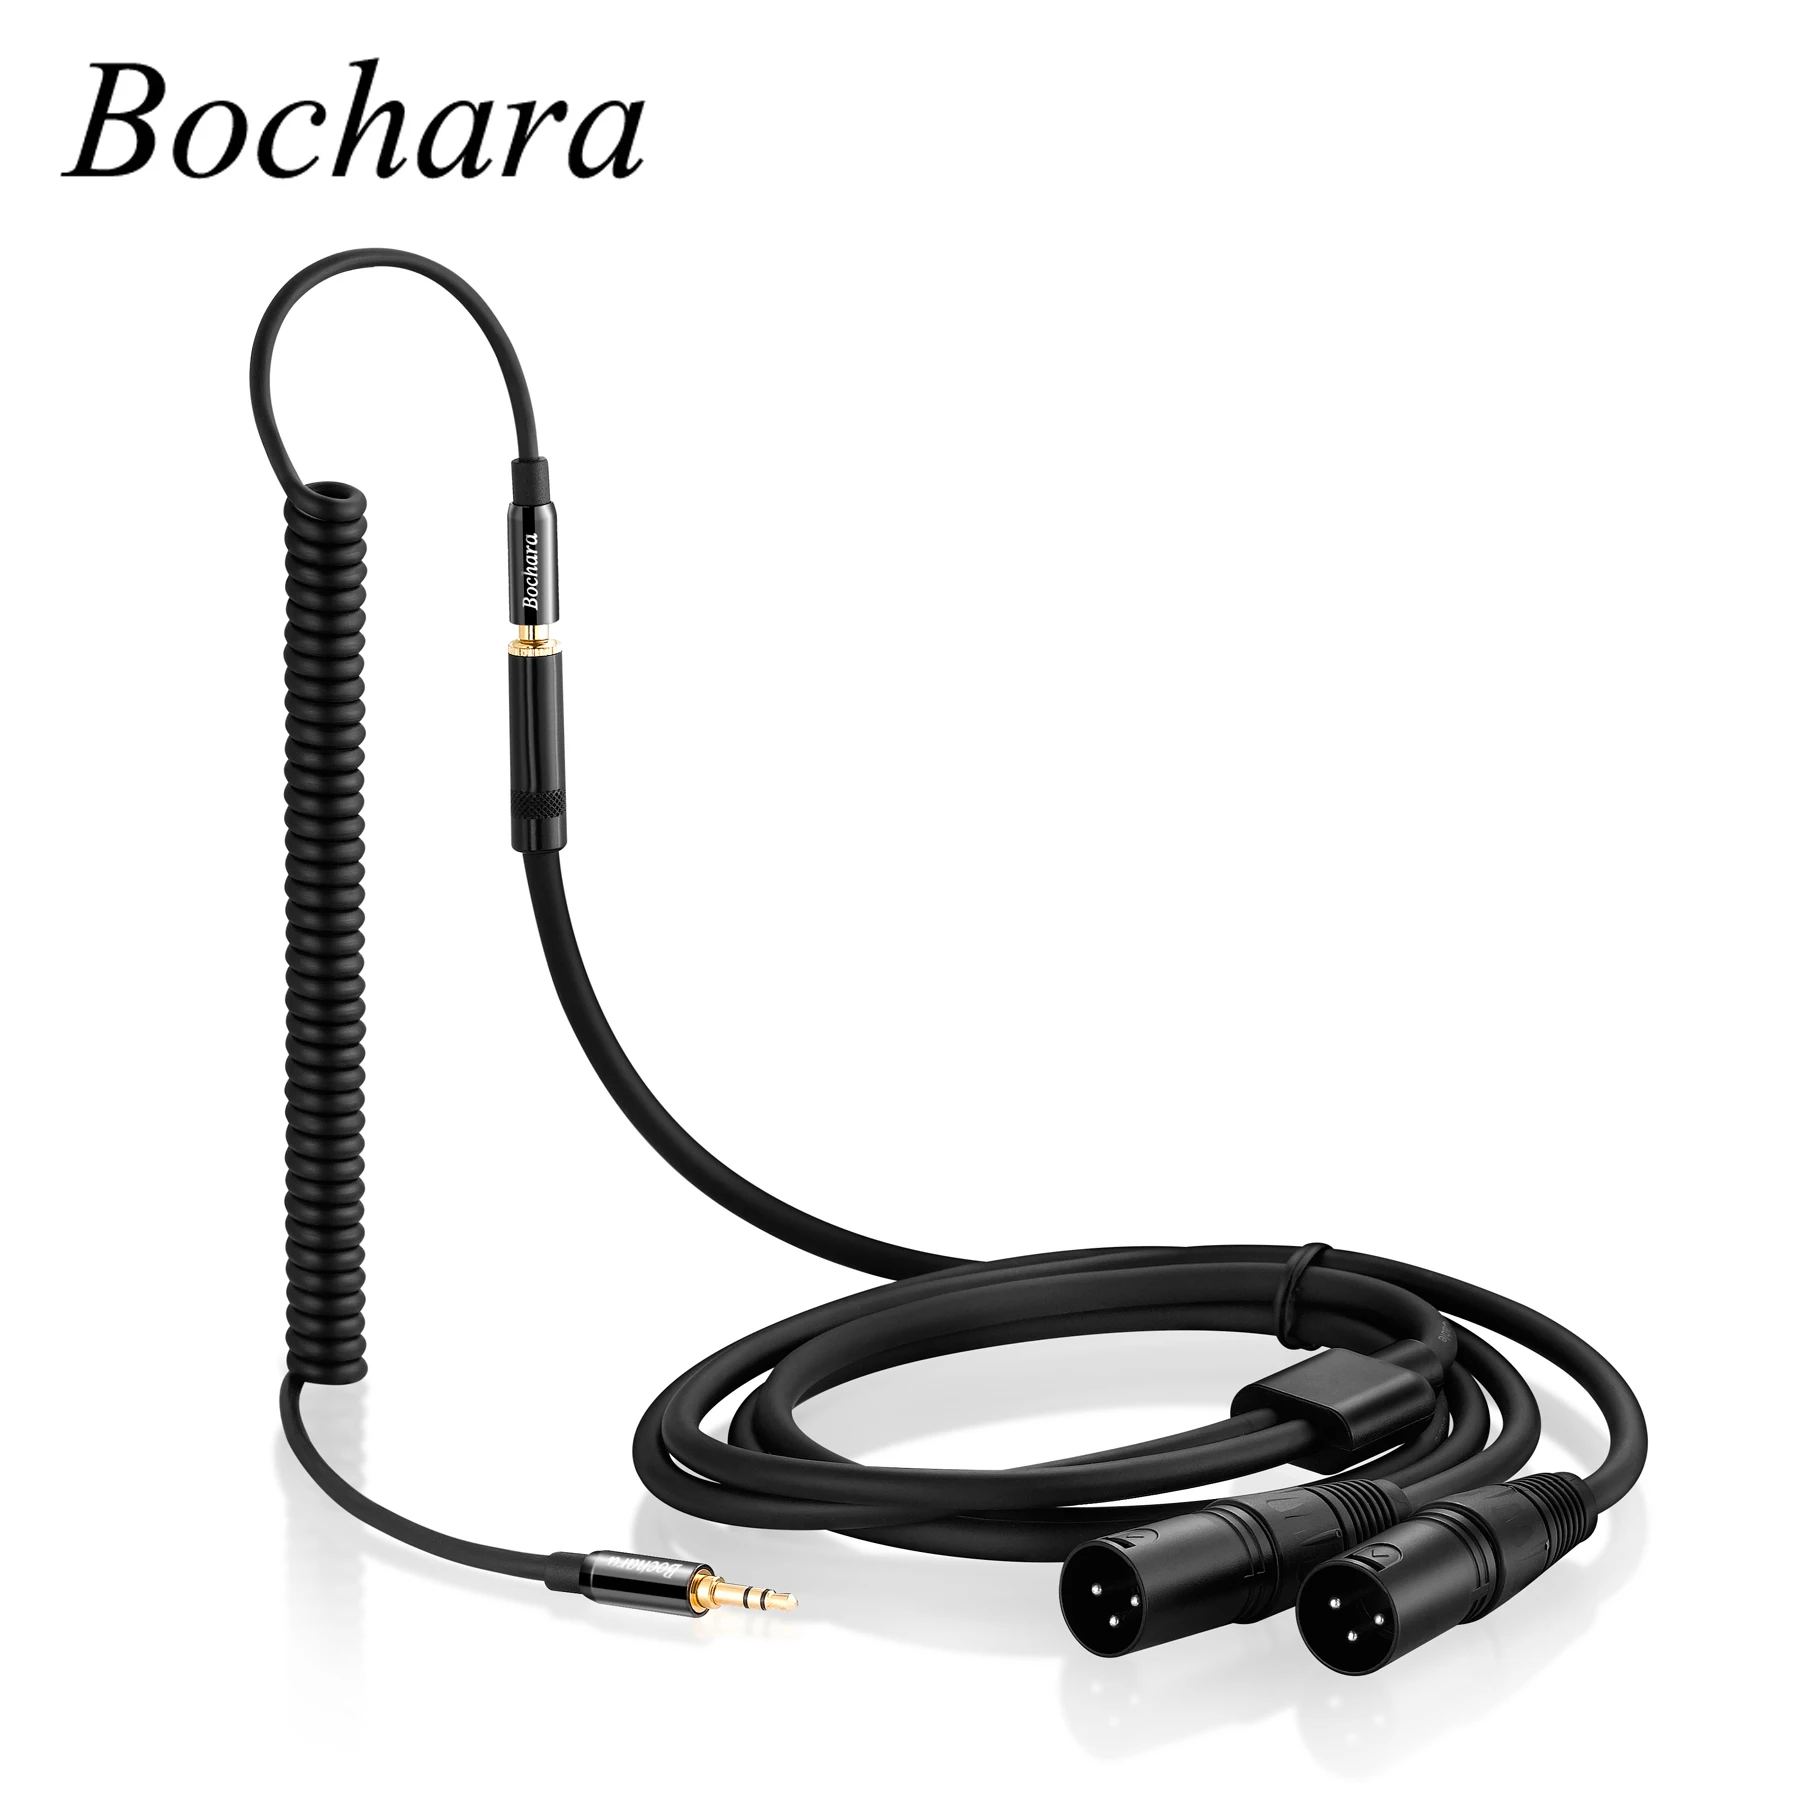 Bochara Elastic Coiled 3.5mm Cable+3.5mm Female Jack to Dual XLR Male OFC Aux Audio Cable Foil+Braided Shielded